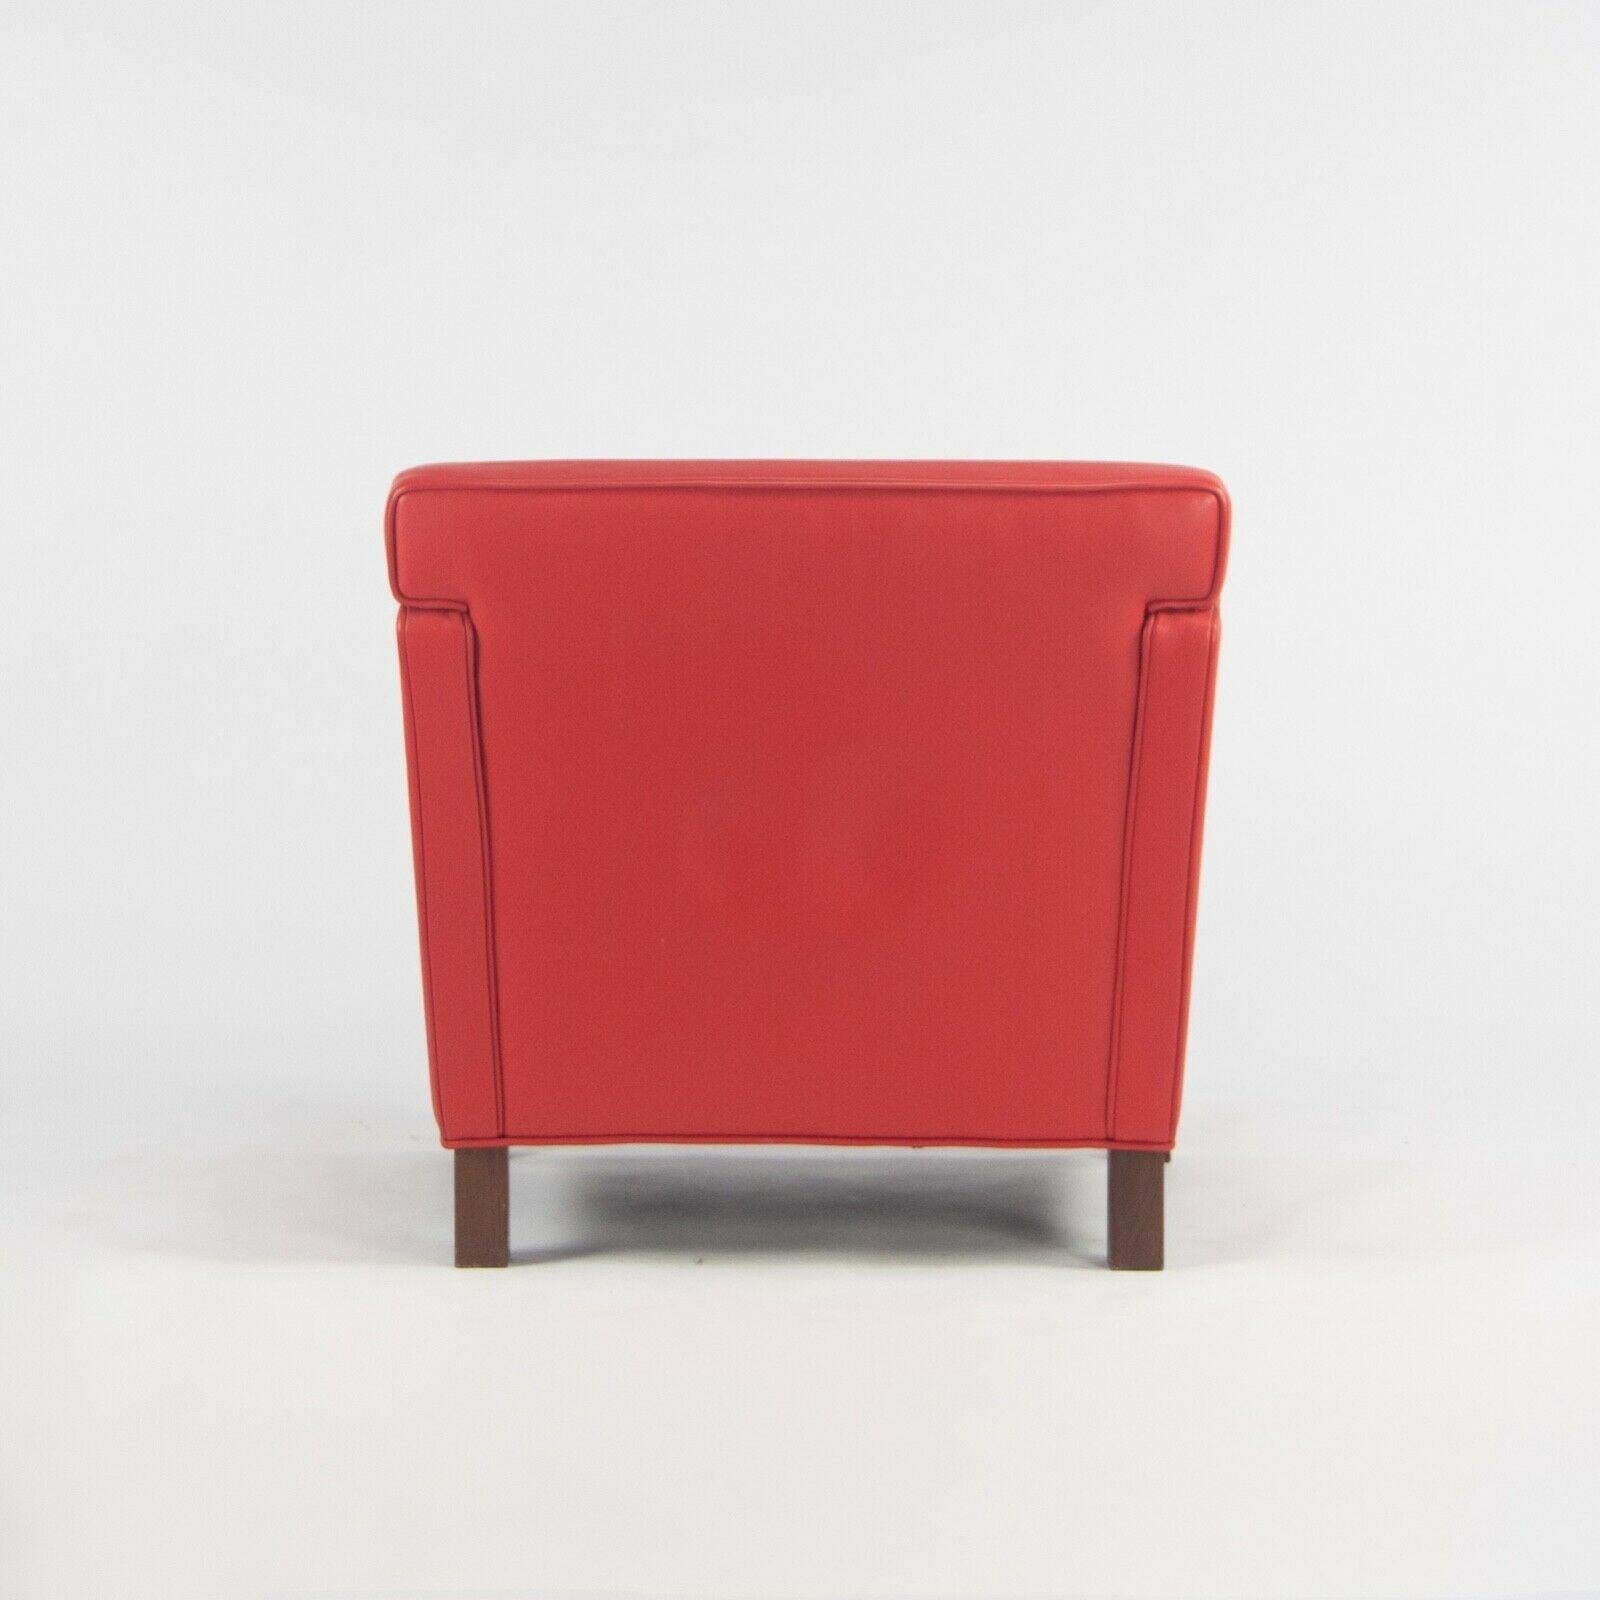 Contemporary C. 2009 Pair of Mies Van Der Rohe Knoll Krefeld Lounge Chairs in Red Leather For Sale